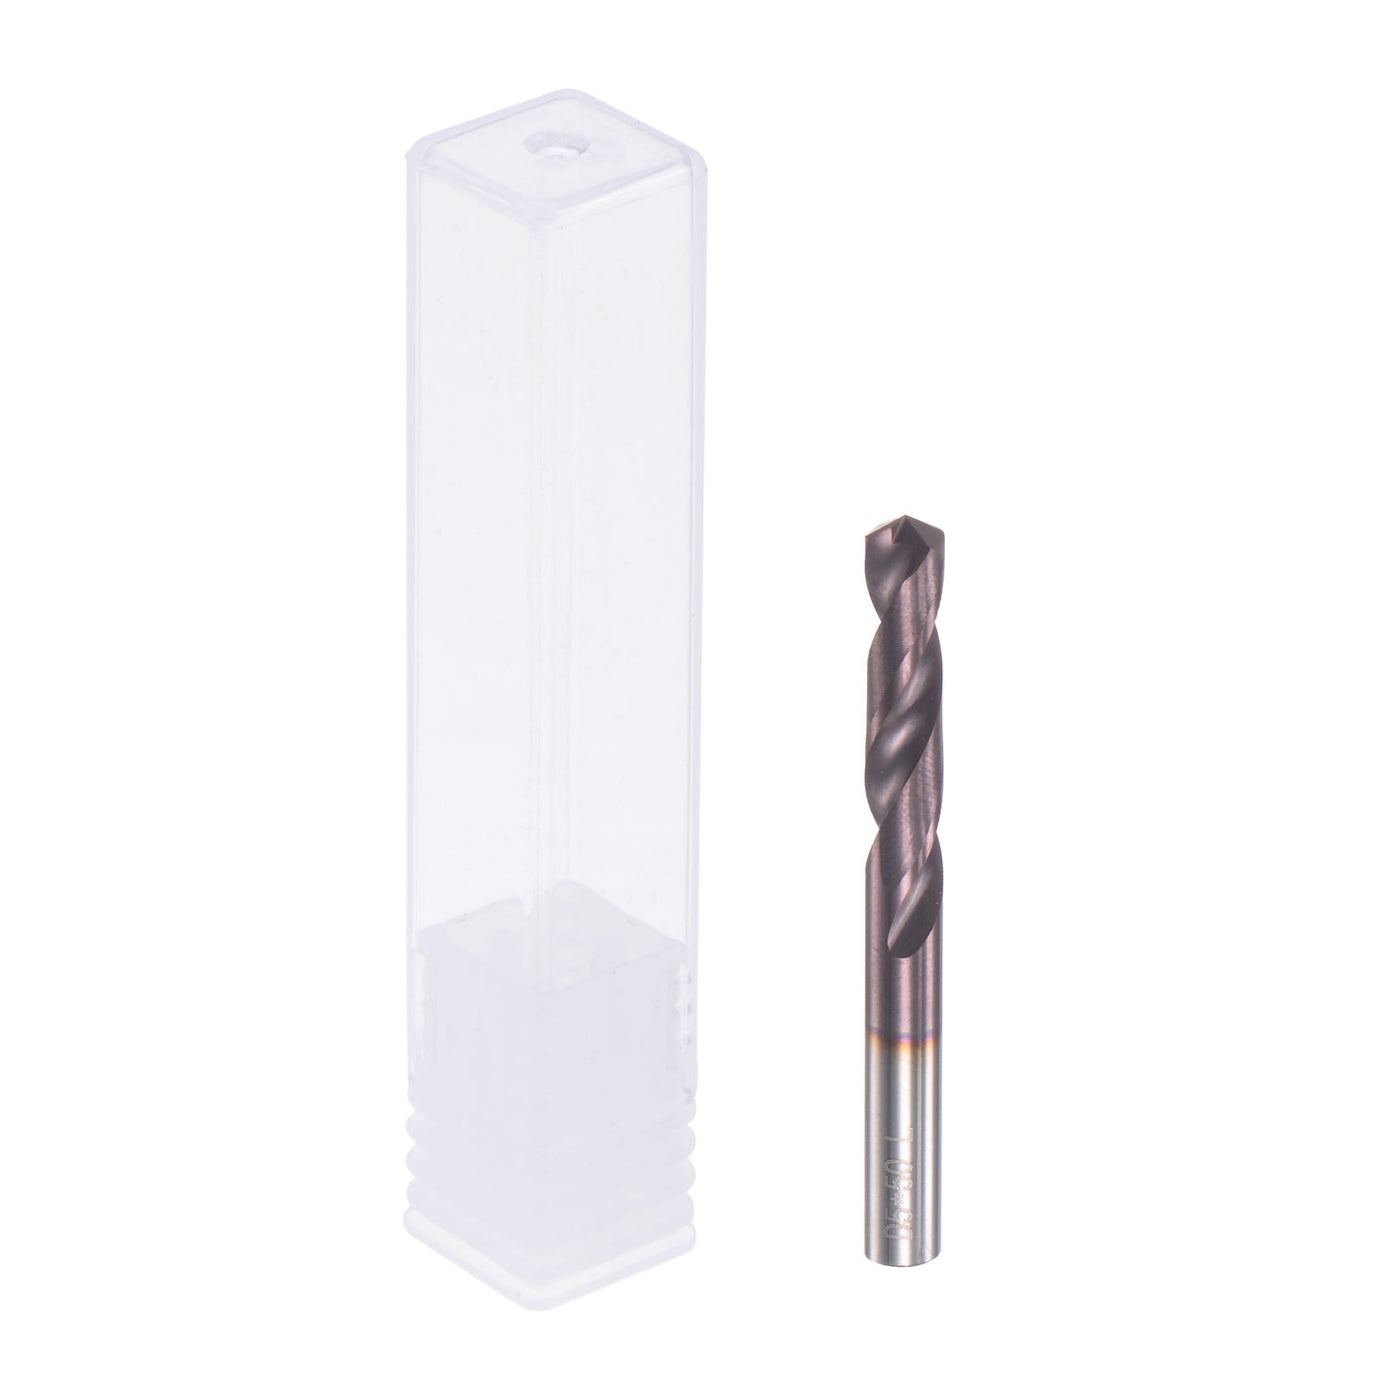 uxcell Uxcell 5mm DIN K45 Tungsten Carbide AlTiSin Coated Drill Bit for Stainless Steel